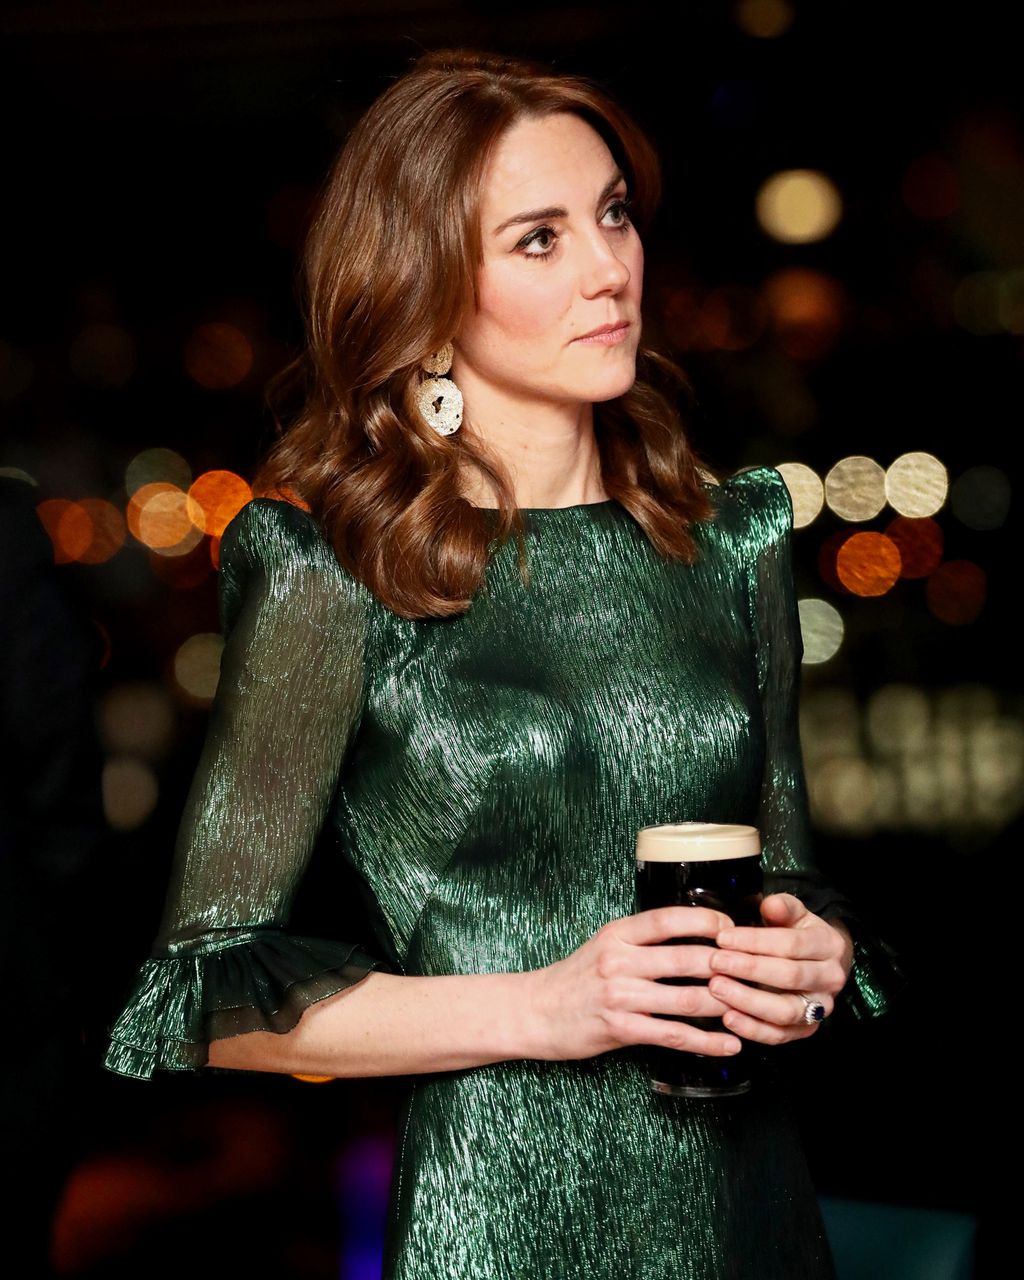 catherine-duchess-of-cambridge-holds-a-pint-of-guinness-as-news-photo-1583339464